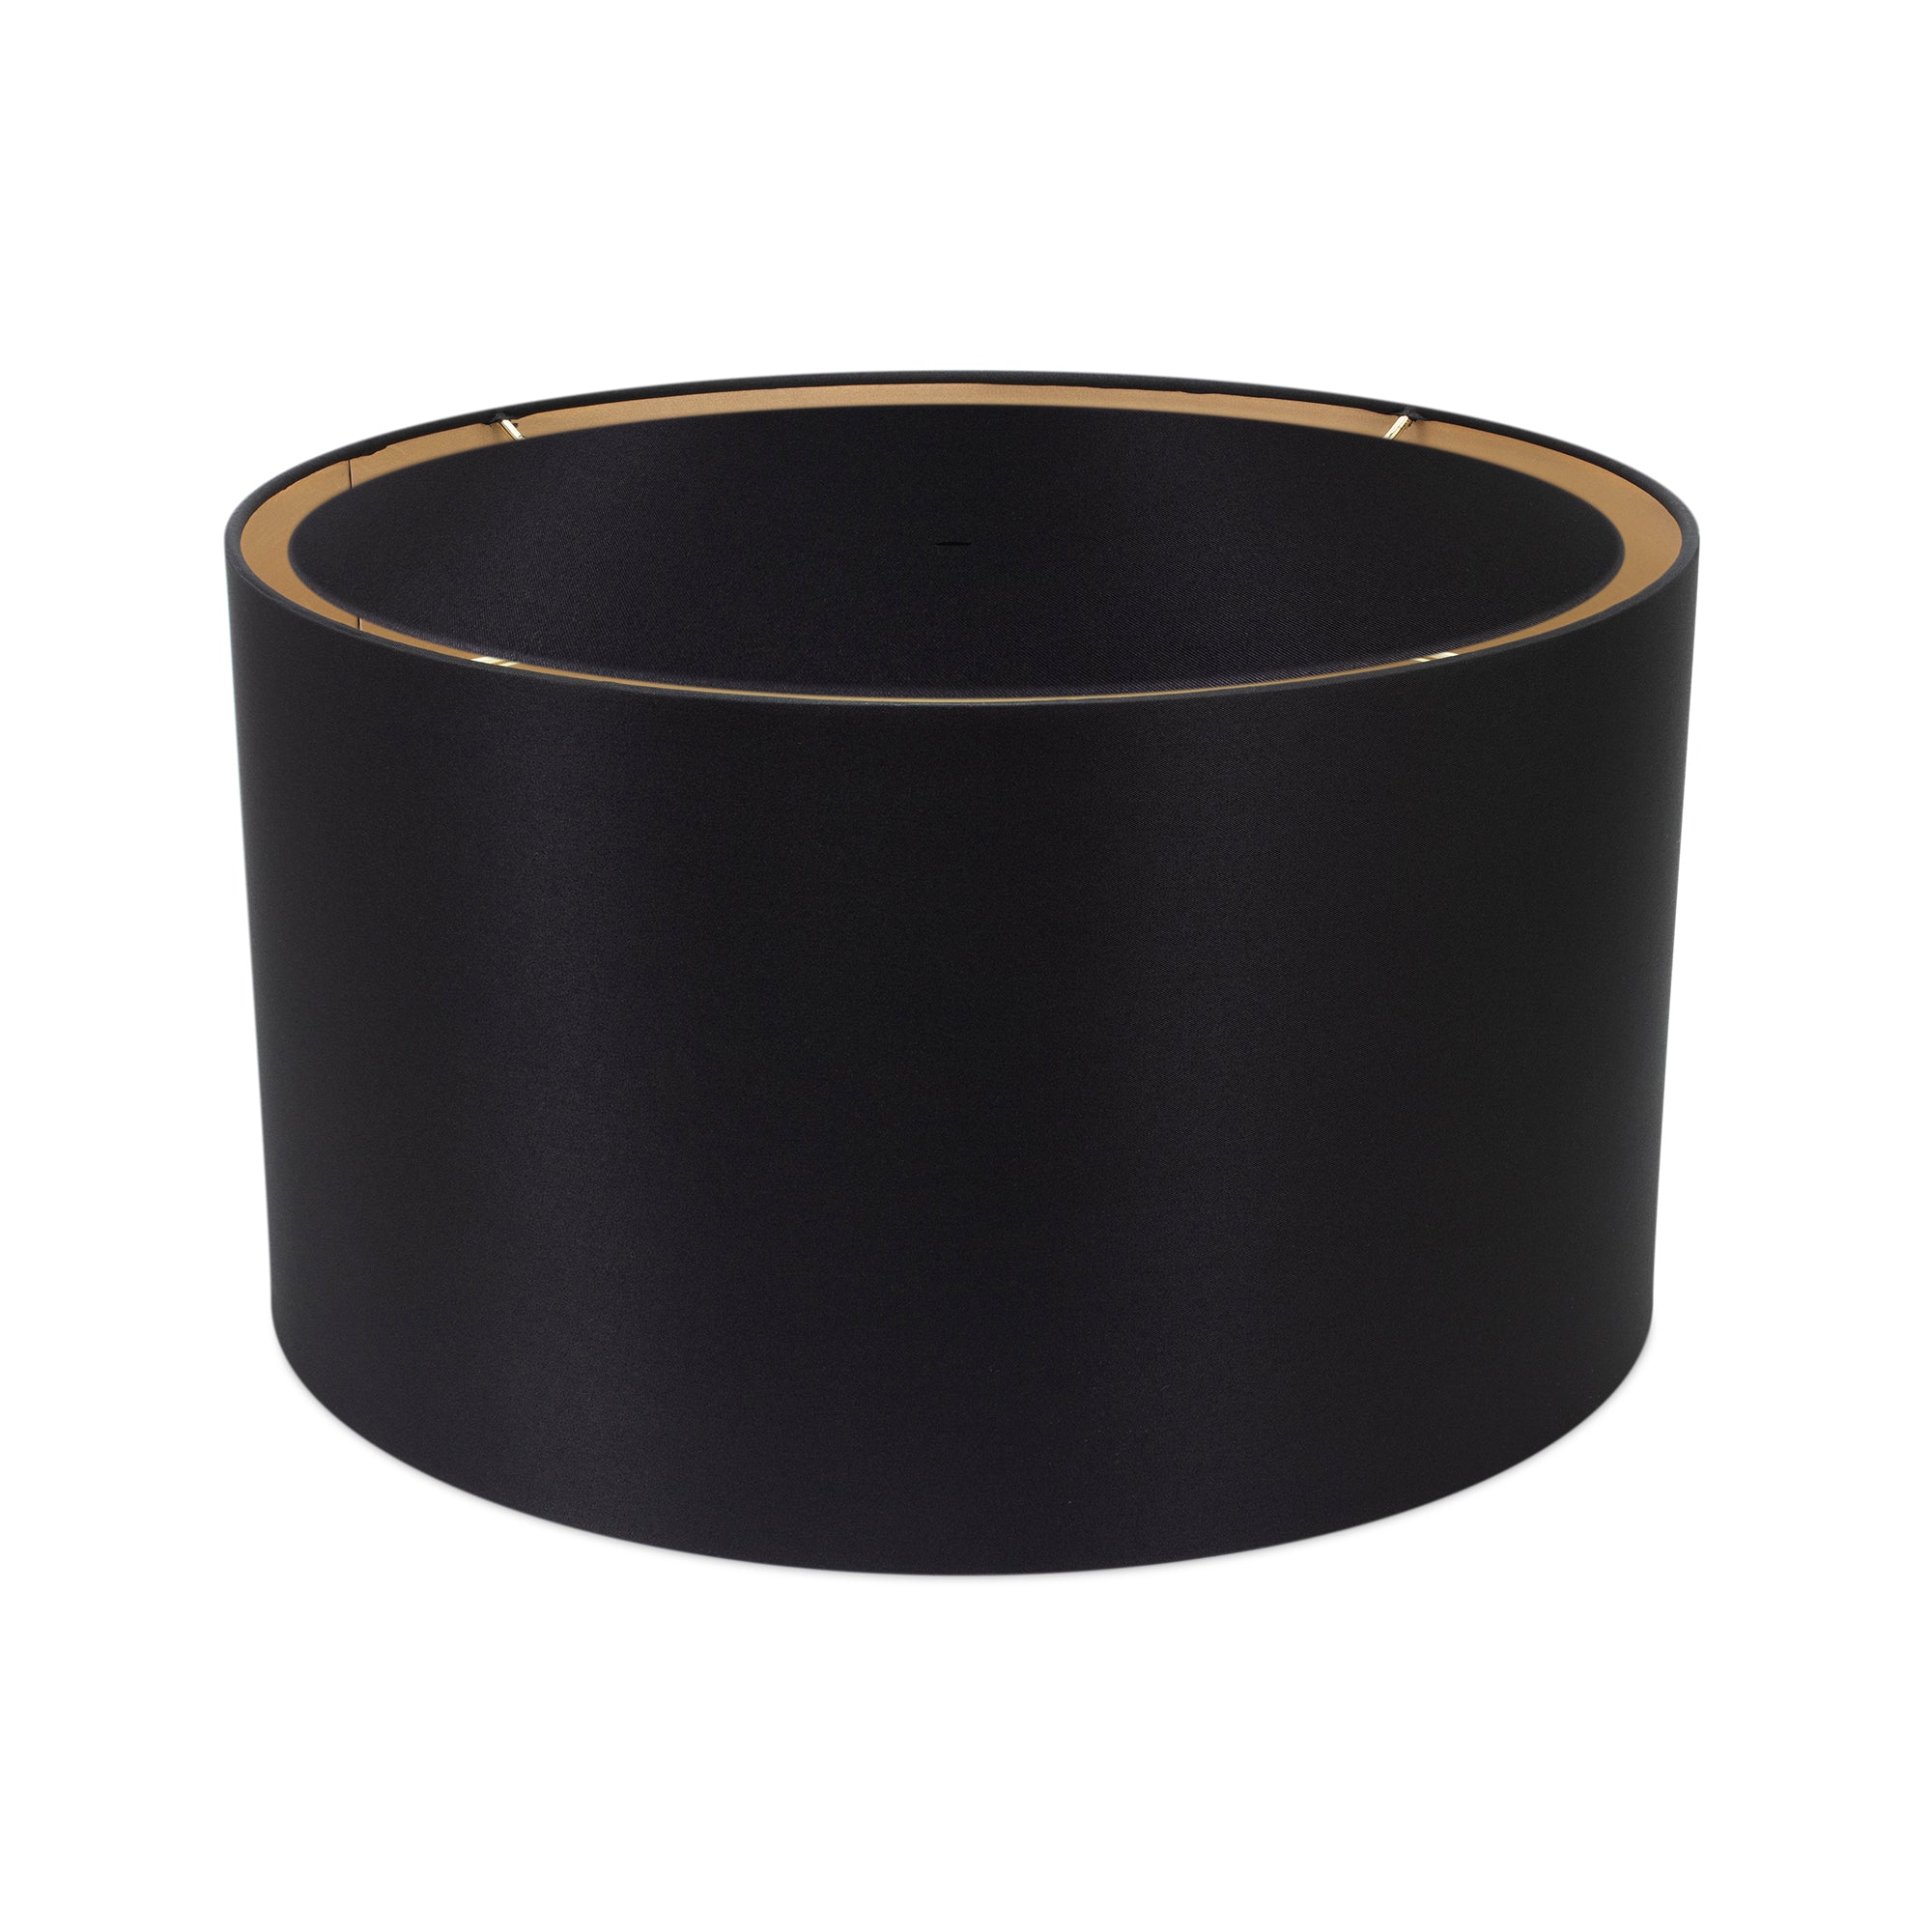 Round Black Linen Drum Shade 15" x 15" x 10" - Couture Lamps